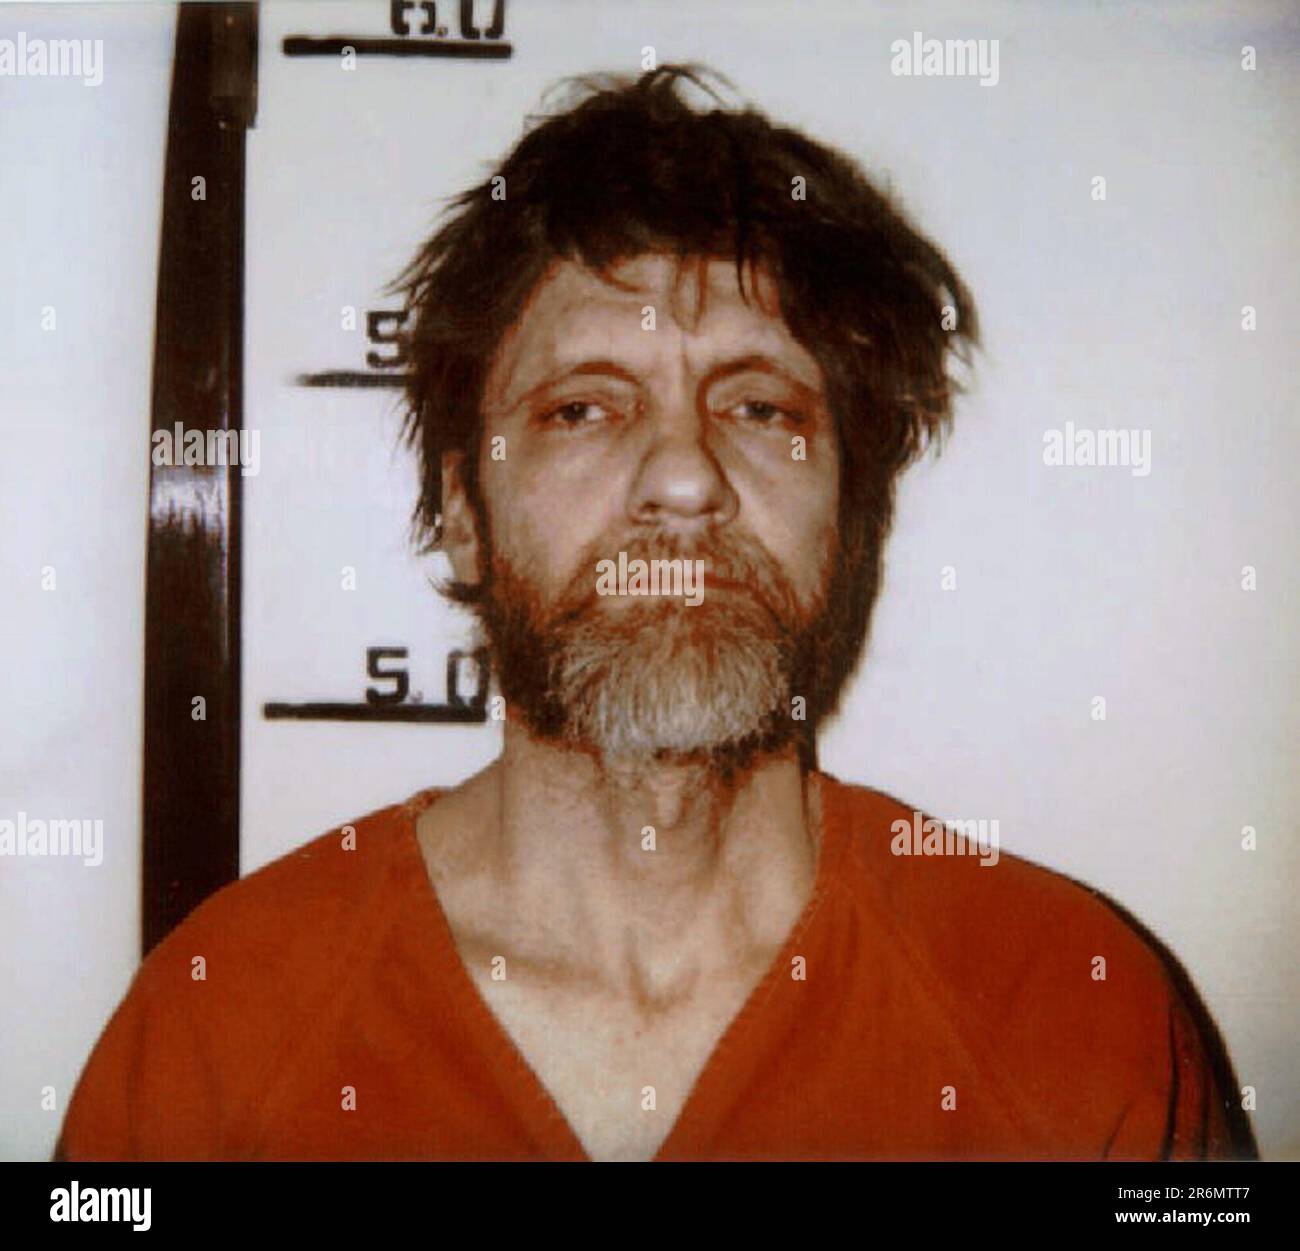 Butner, North Carolina, USA. 10th June, 2023. 'Unabomber' THEODORE 'TED' KACZYNSKI, the Harvard-educated mathematician who retreated to a dingy shack in the Montana wilderness and ran a 17-year bombing campaign that killed three people and injured 23 others, died Saturday. He was 81. FILE PHOTO SHOT IN: April 9, 1996, Helena, Montana, USA: 'Unabomber' THEODORE 'TED' KACZYNSKI, 53, is shown in an April 3,1996 mug shot at Lewis and Clark County Jail. Credit: Lewis and Clark Sheriff Dept./ZUMAPRESS.com/Alamy Live News Stock Photo